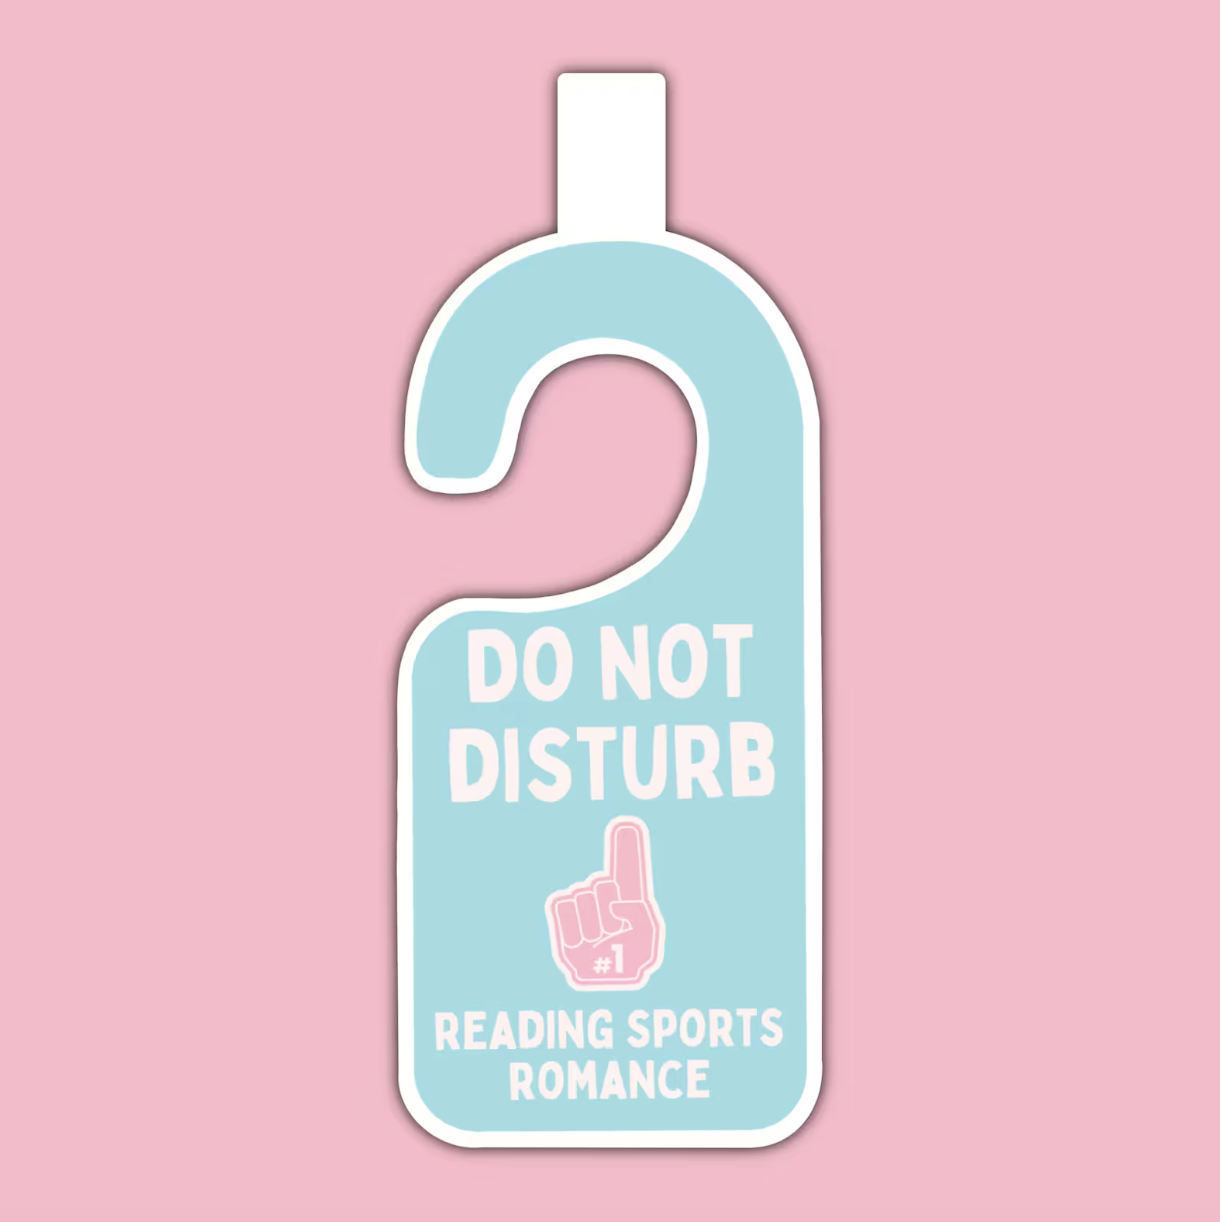 image of a light blue magnetic bookmark shaped like a door handle hanger that says "do not disturb, reading sports romance"